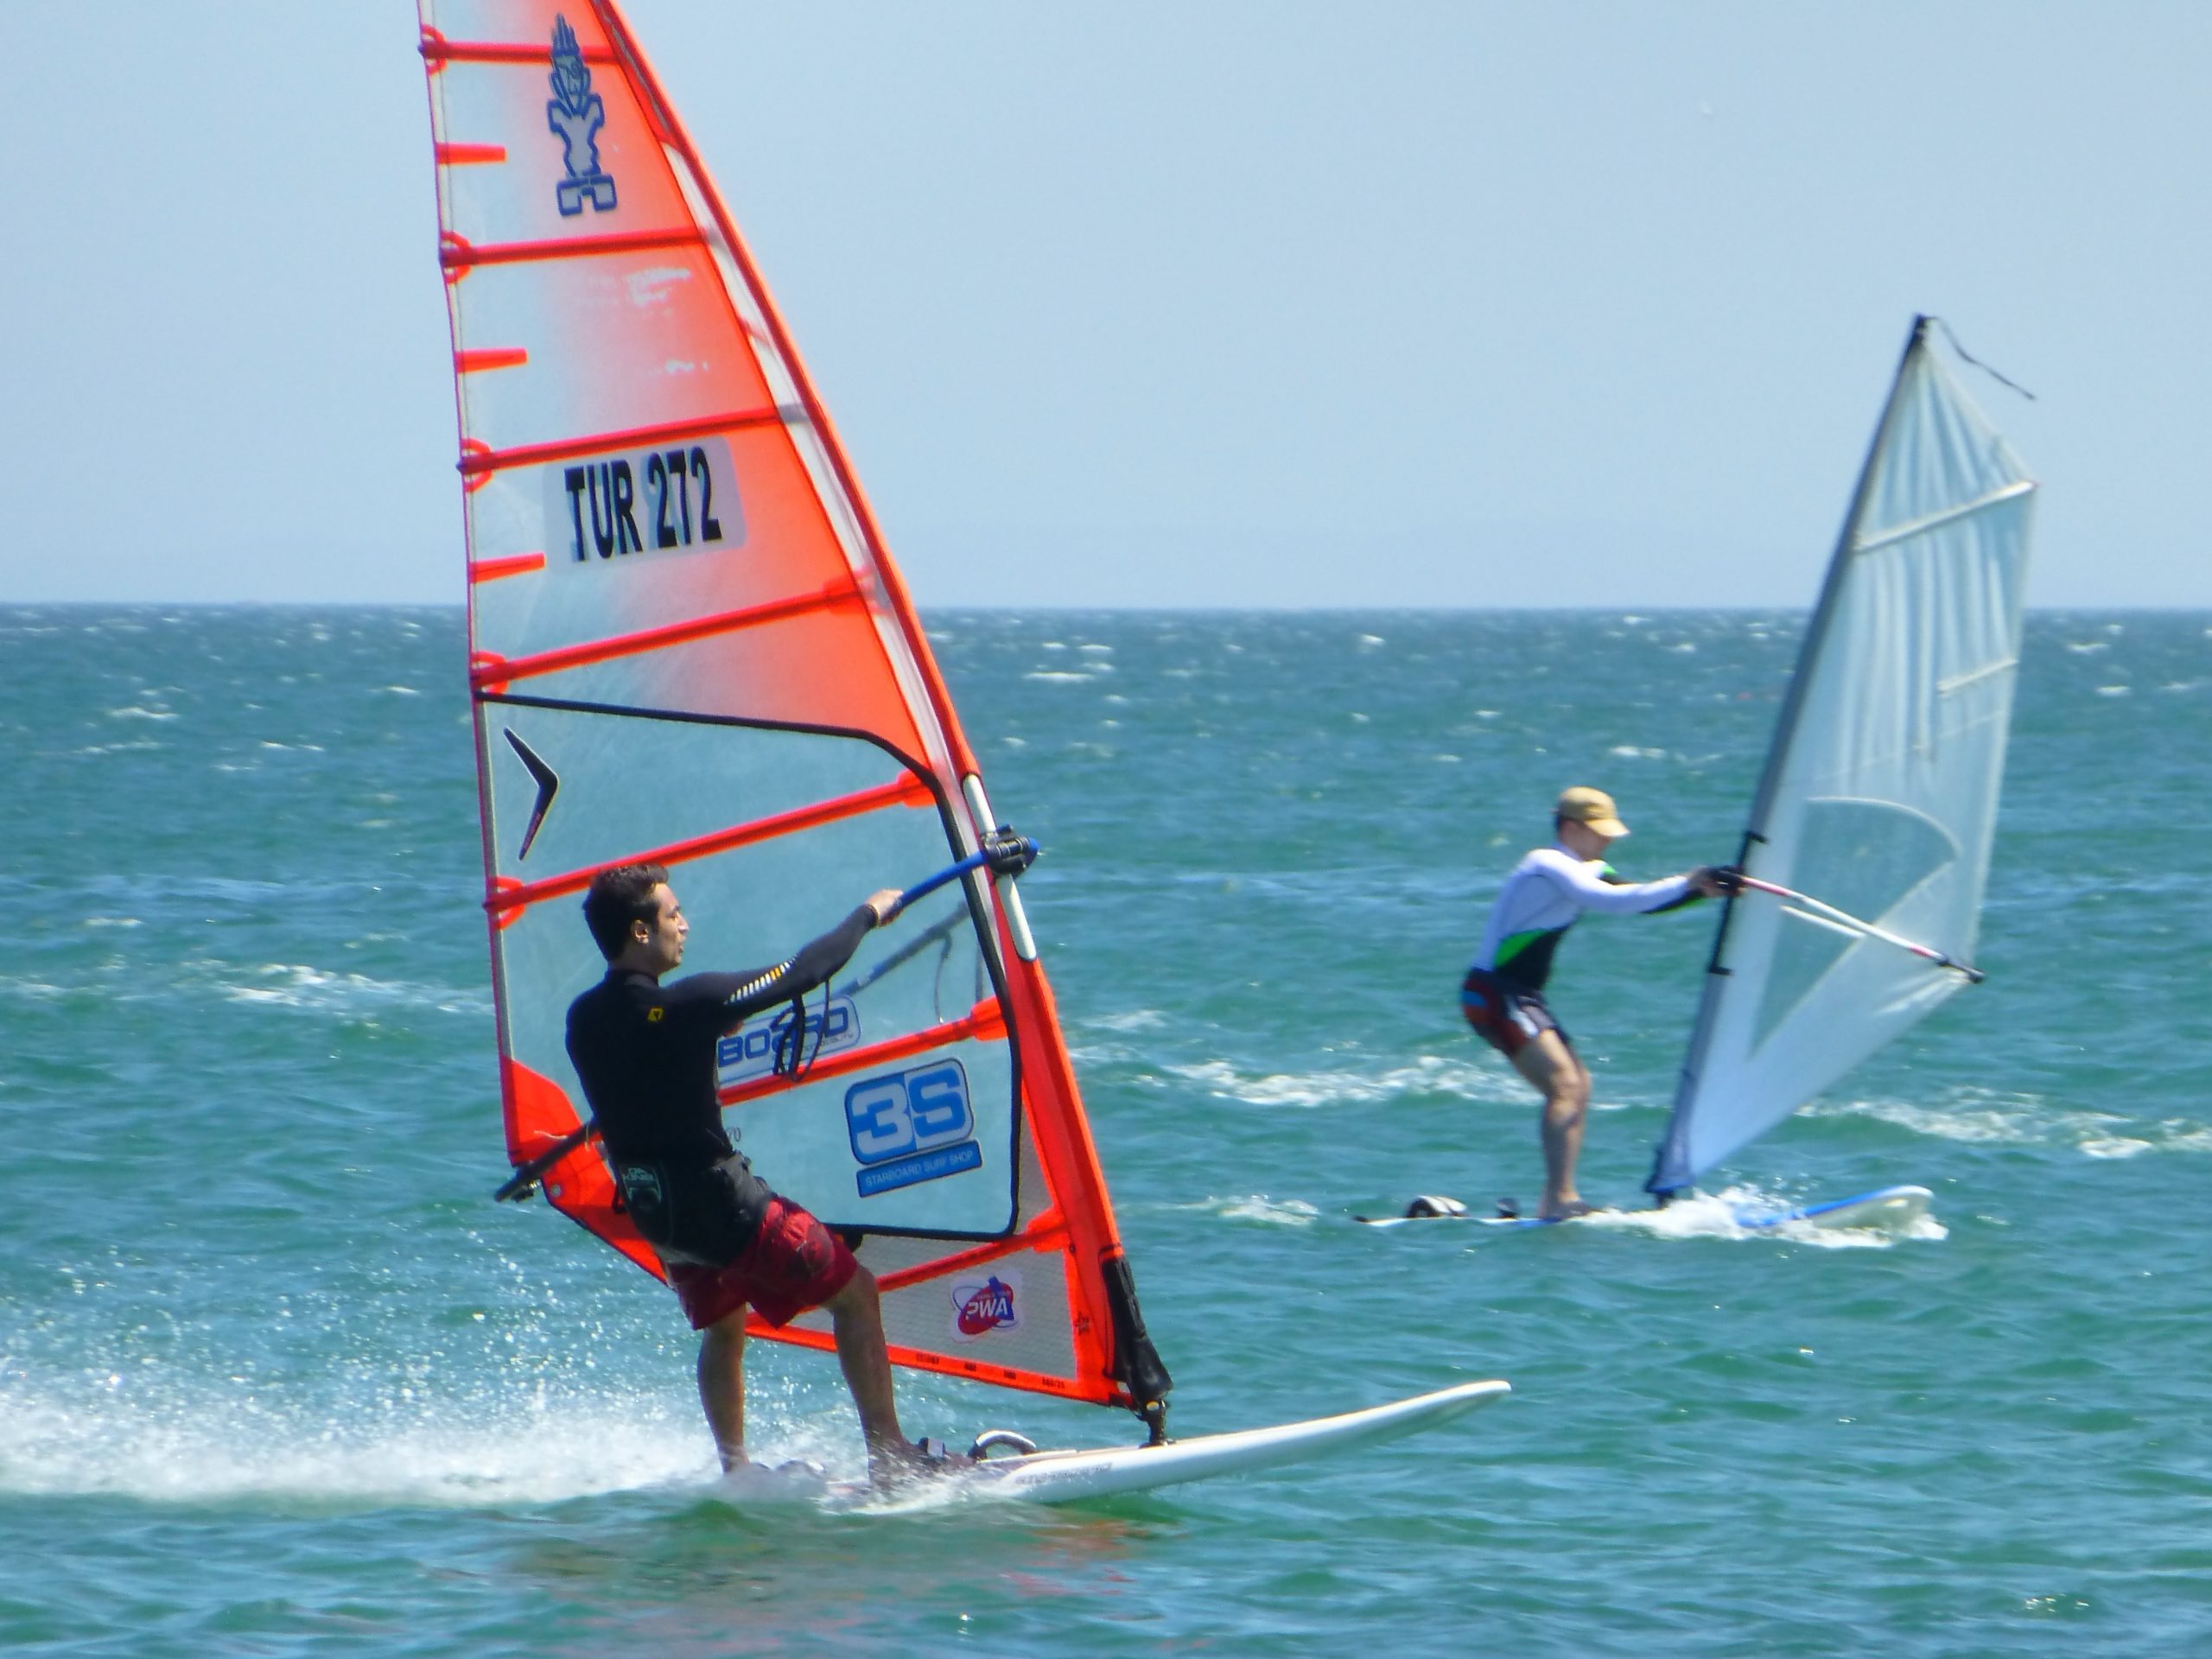 How To Sail: The Ultimate Guide To Beginner’s Windsurfing